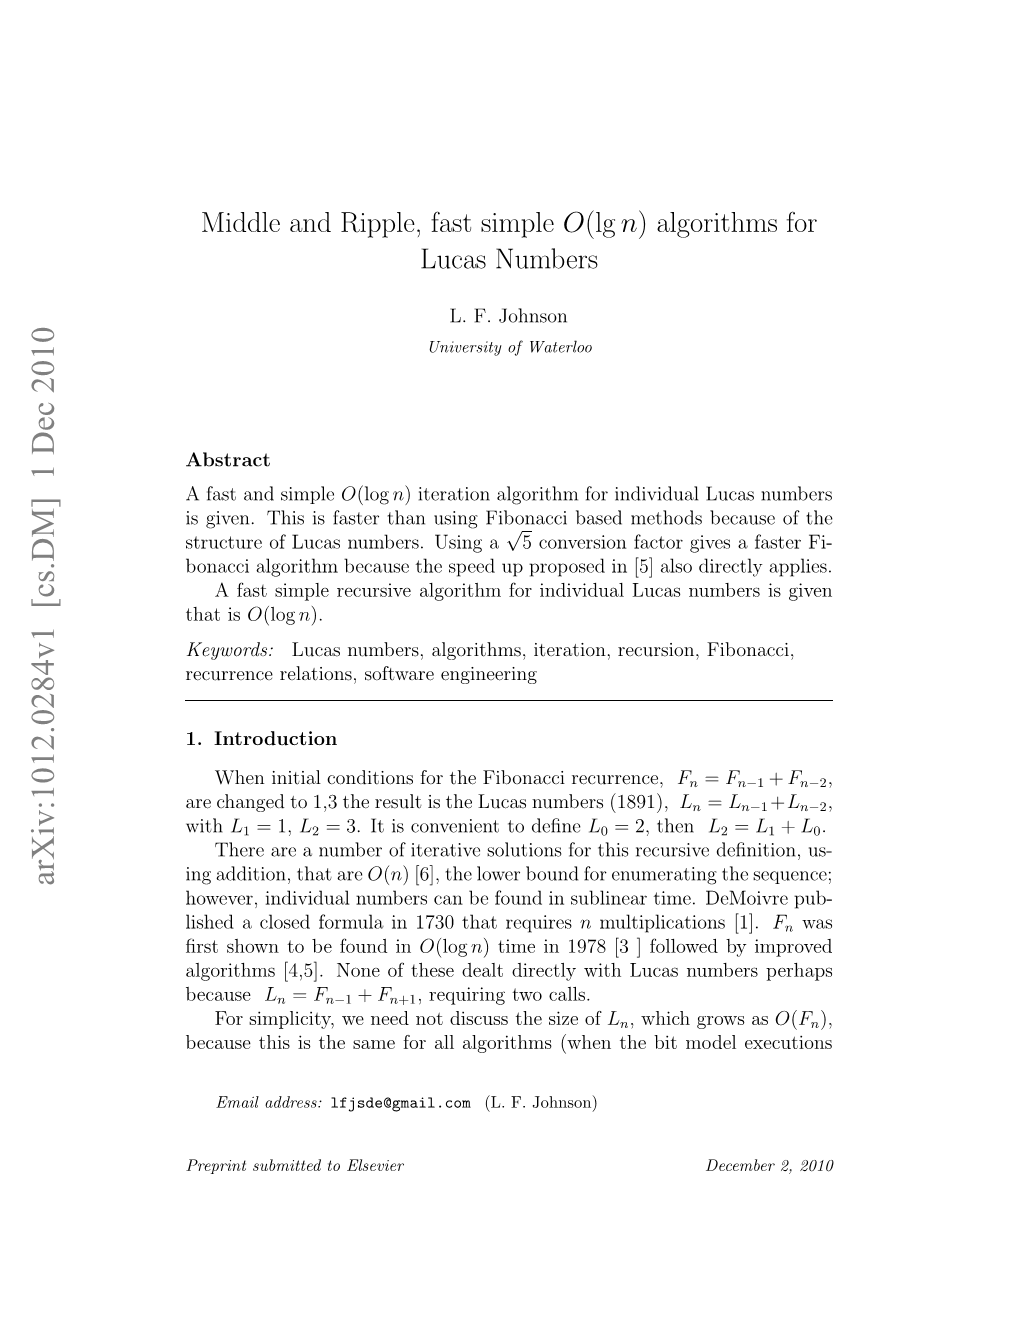 Middle and Ripple, Fast Simple O (Lg N) Algorithms for Lucas Numbers